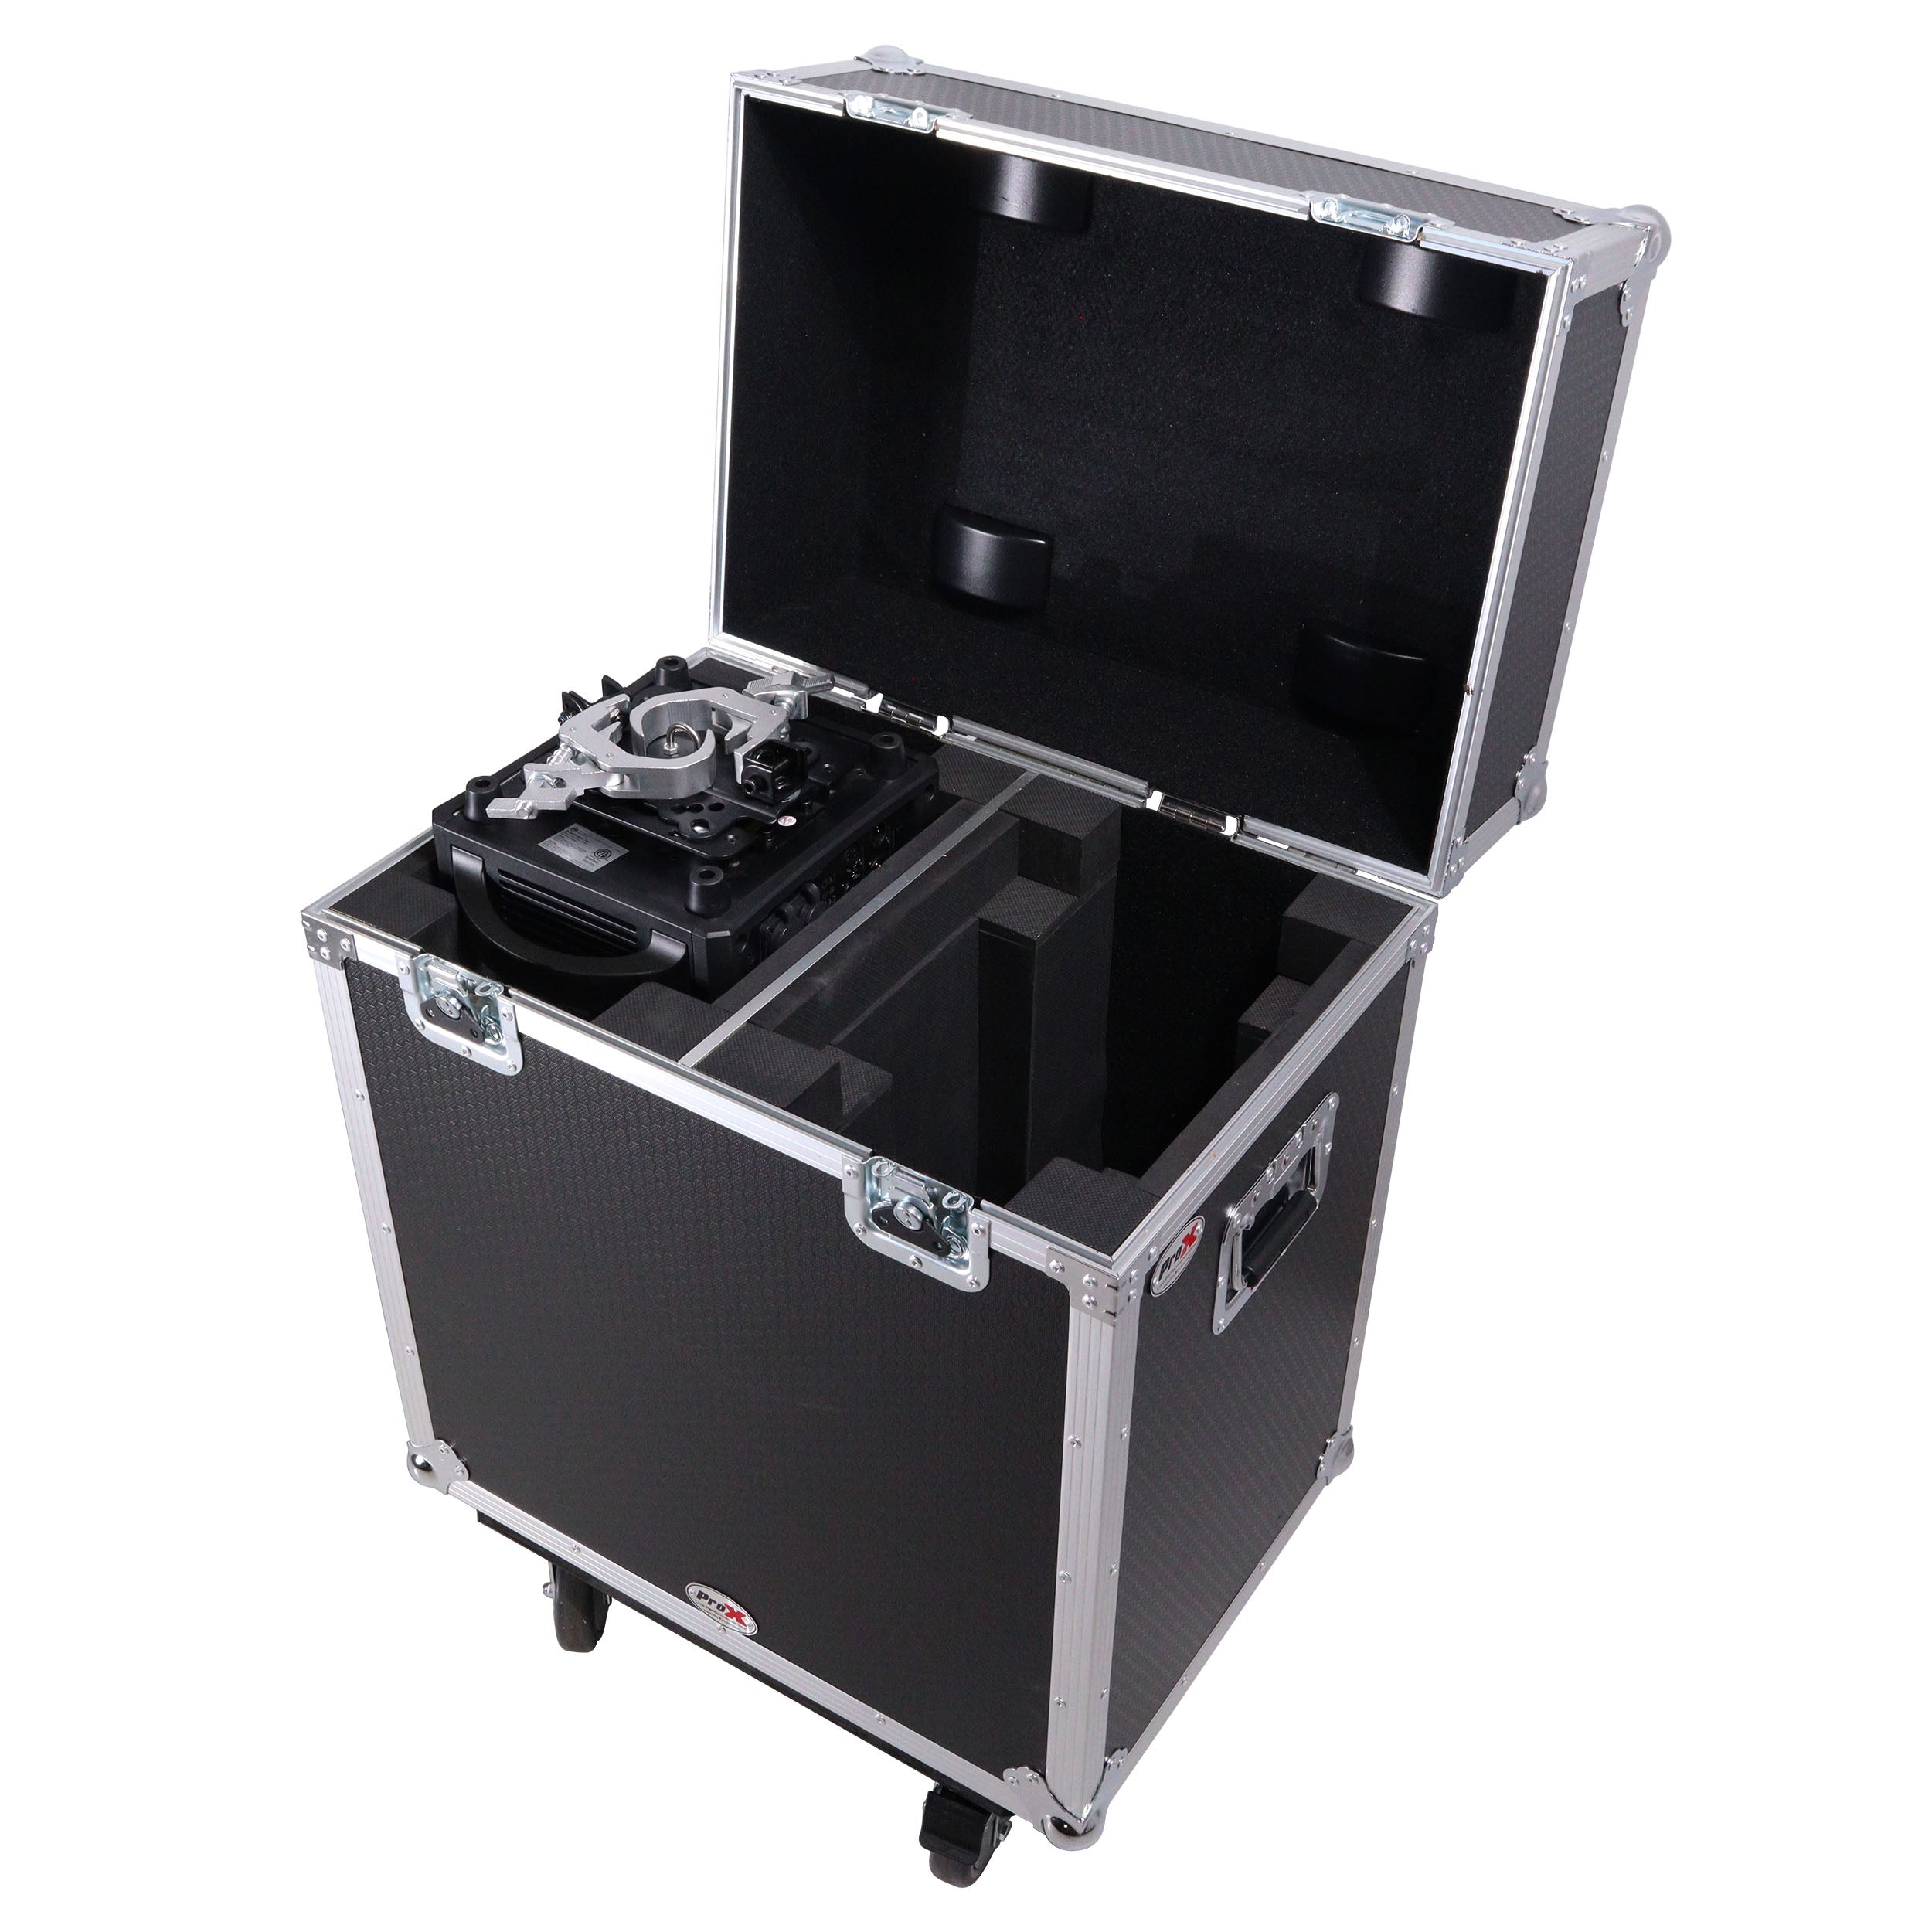 Pro X Moving Head Lighting Road Case for ADJ Hydro Beam X12 Vizi Beam 12RX Fits 2 Units with 4" Casters XS-MH12RX2W